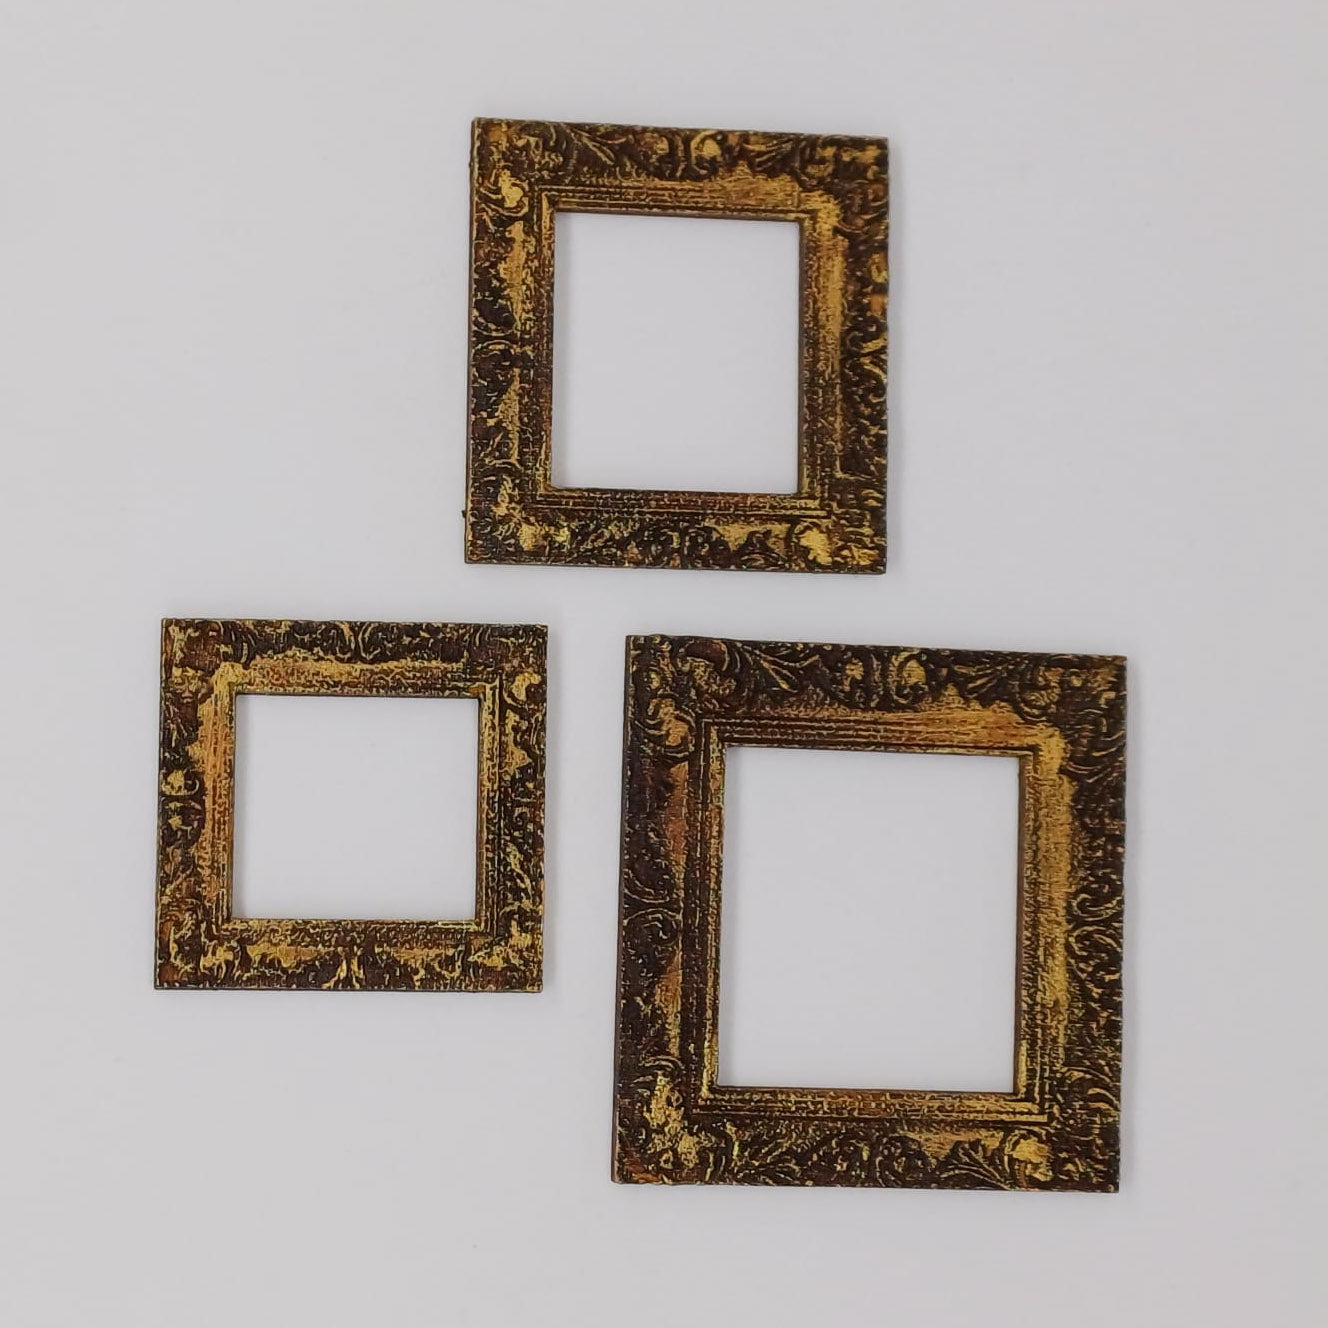 decorated picture frames on a scale of 1:12